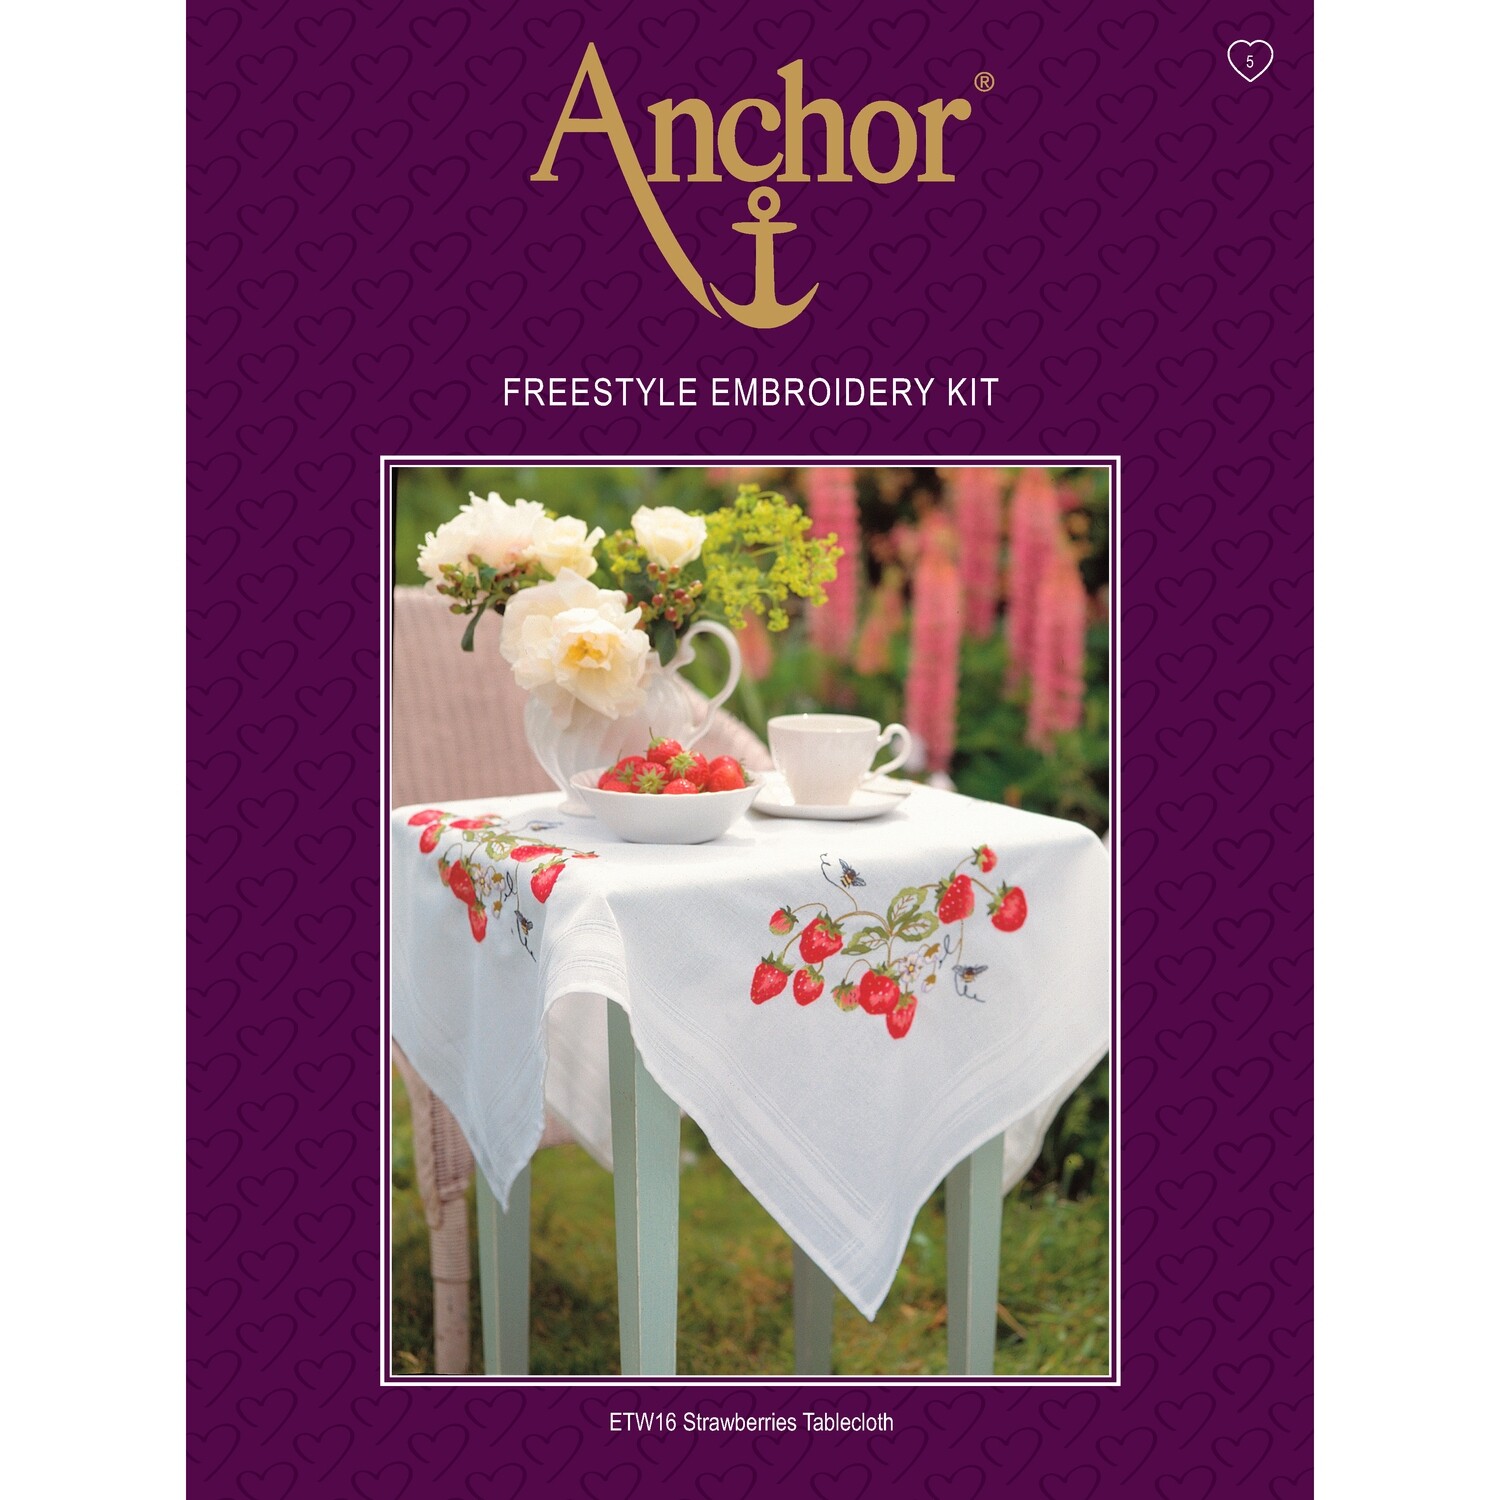 Anchor Essentials Freestyle Kit - Strawberries Tablecloth